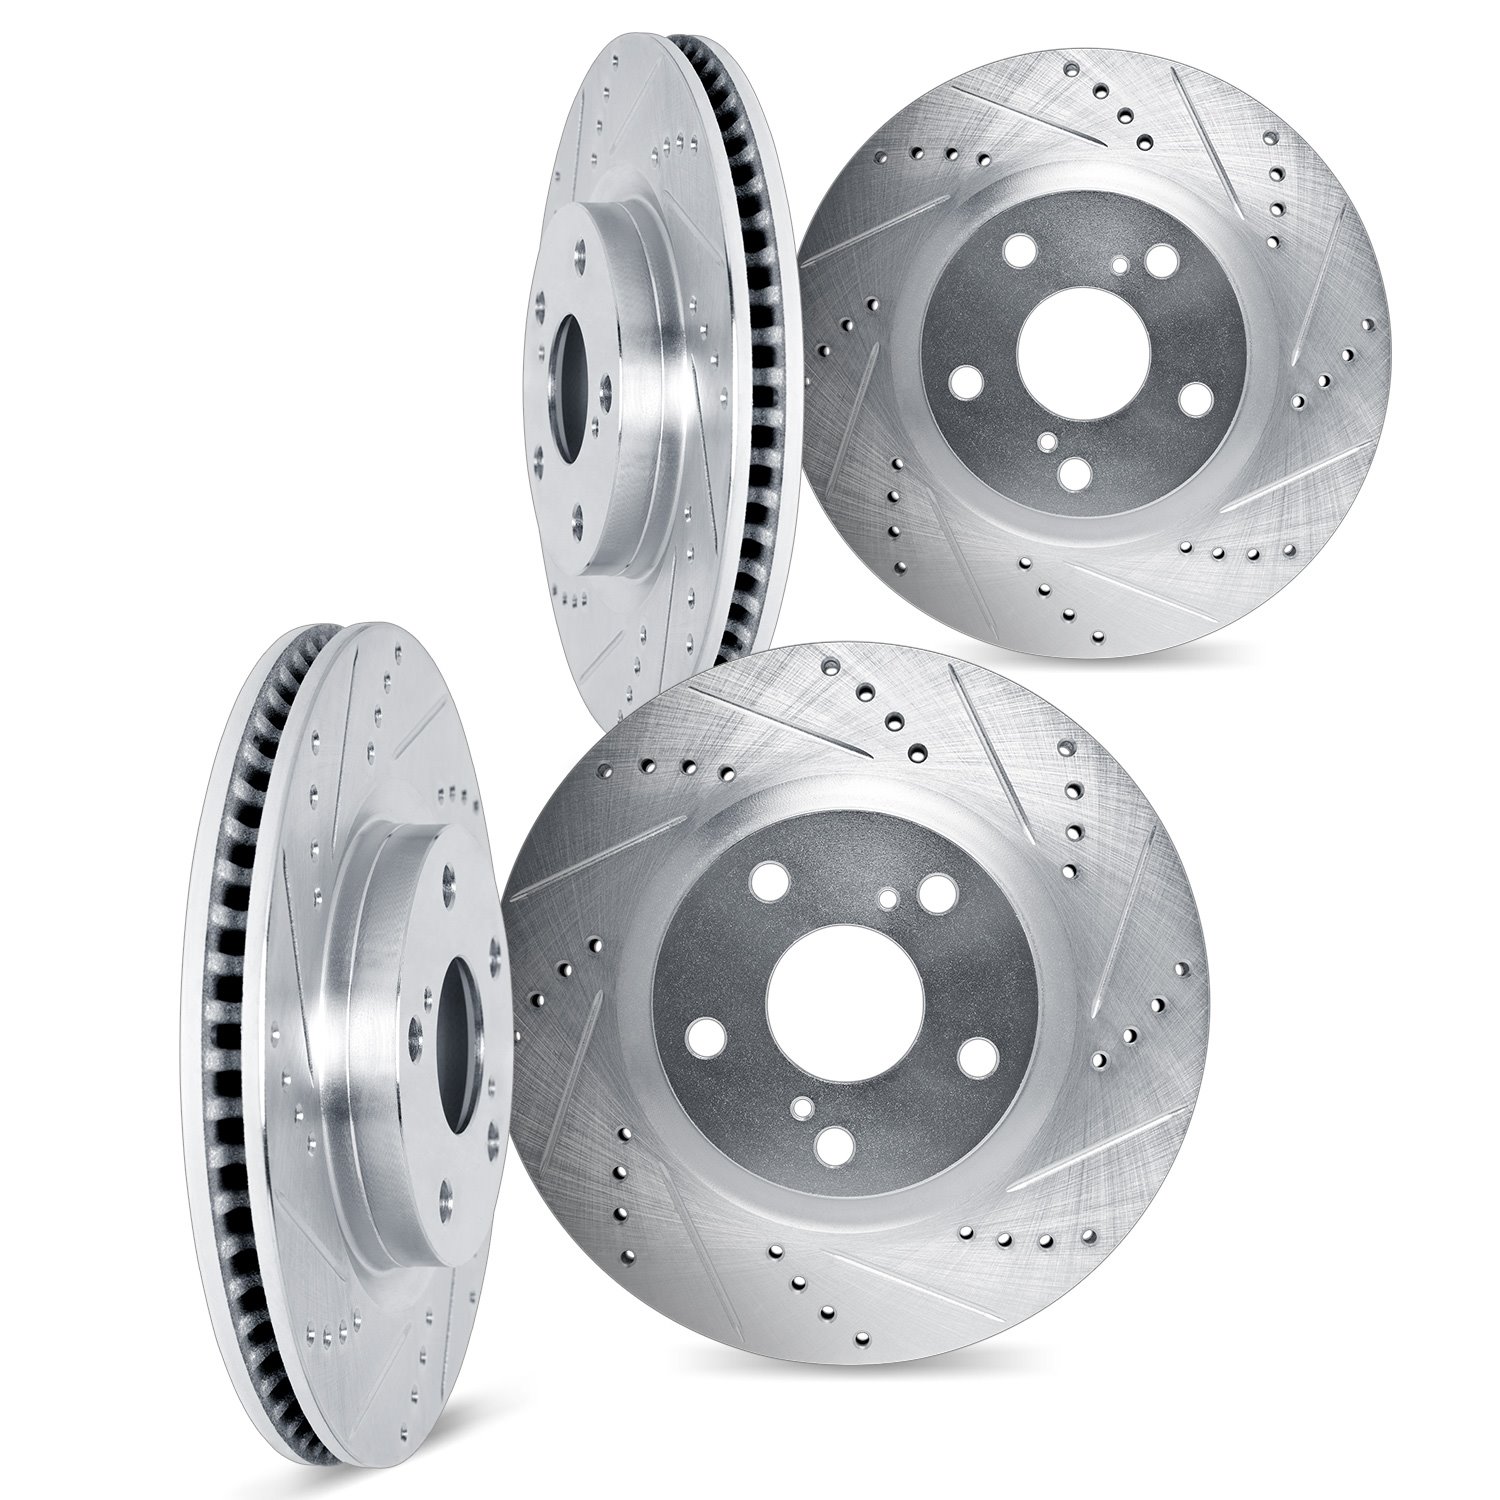 7004-75026 Drilled/Slotted Brake Rotors [Silver], Fits Select Lexus/Toyota/Scion, Position: Front and Rear